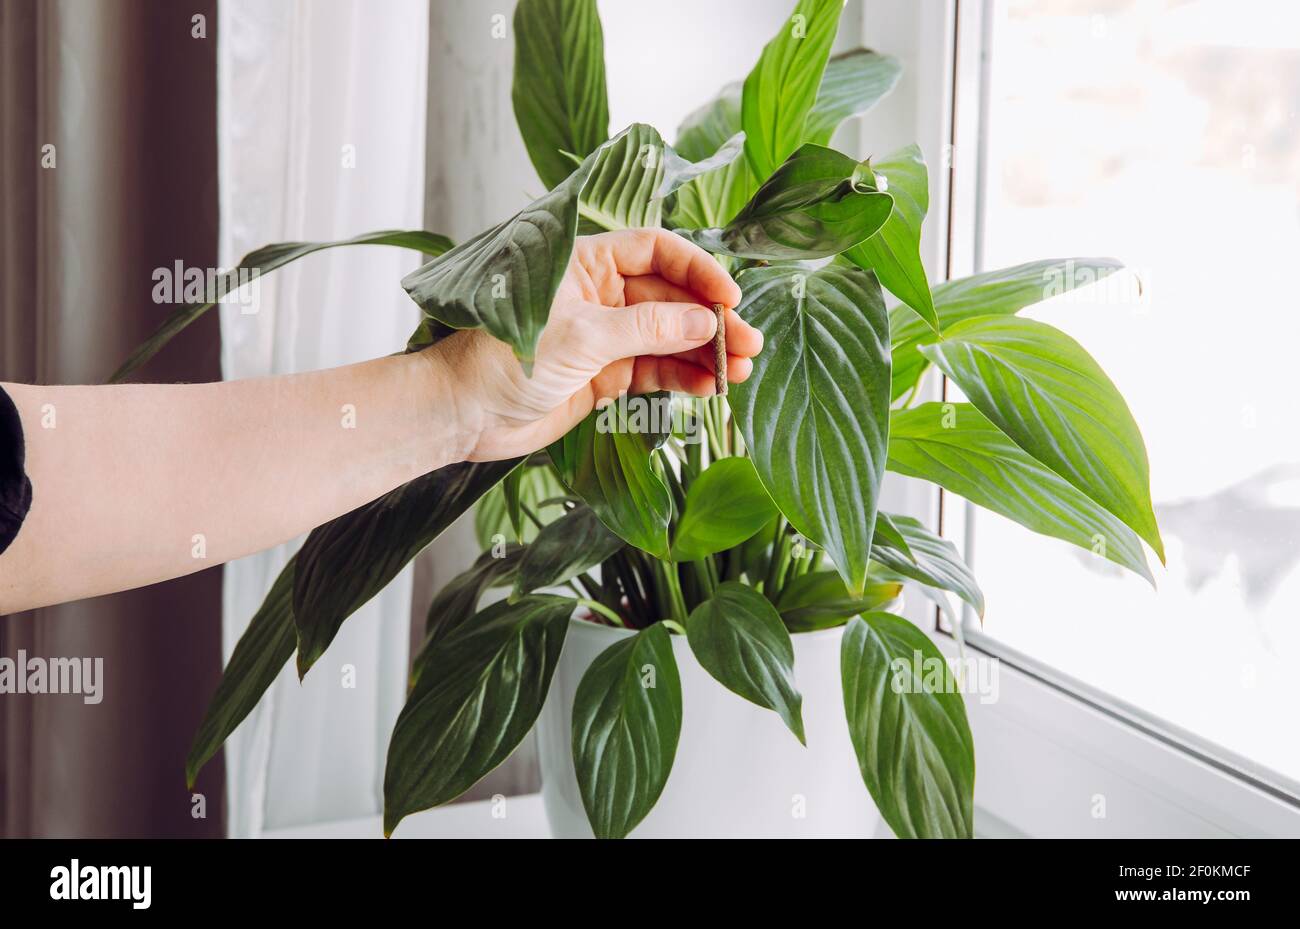 Using slow-release houseplant fertilizer stick spike at spring. Spathiphyllum are commonly known as spath or peace lilies. Hand holding fertilizer sti Stock Photo